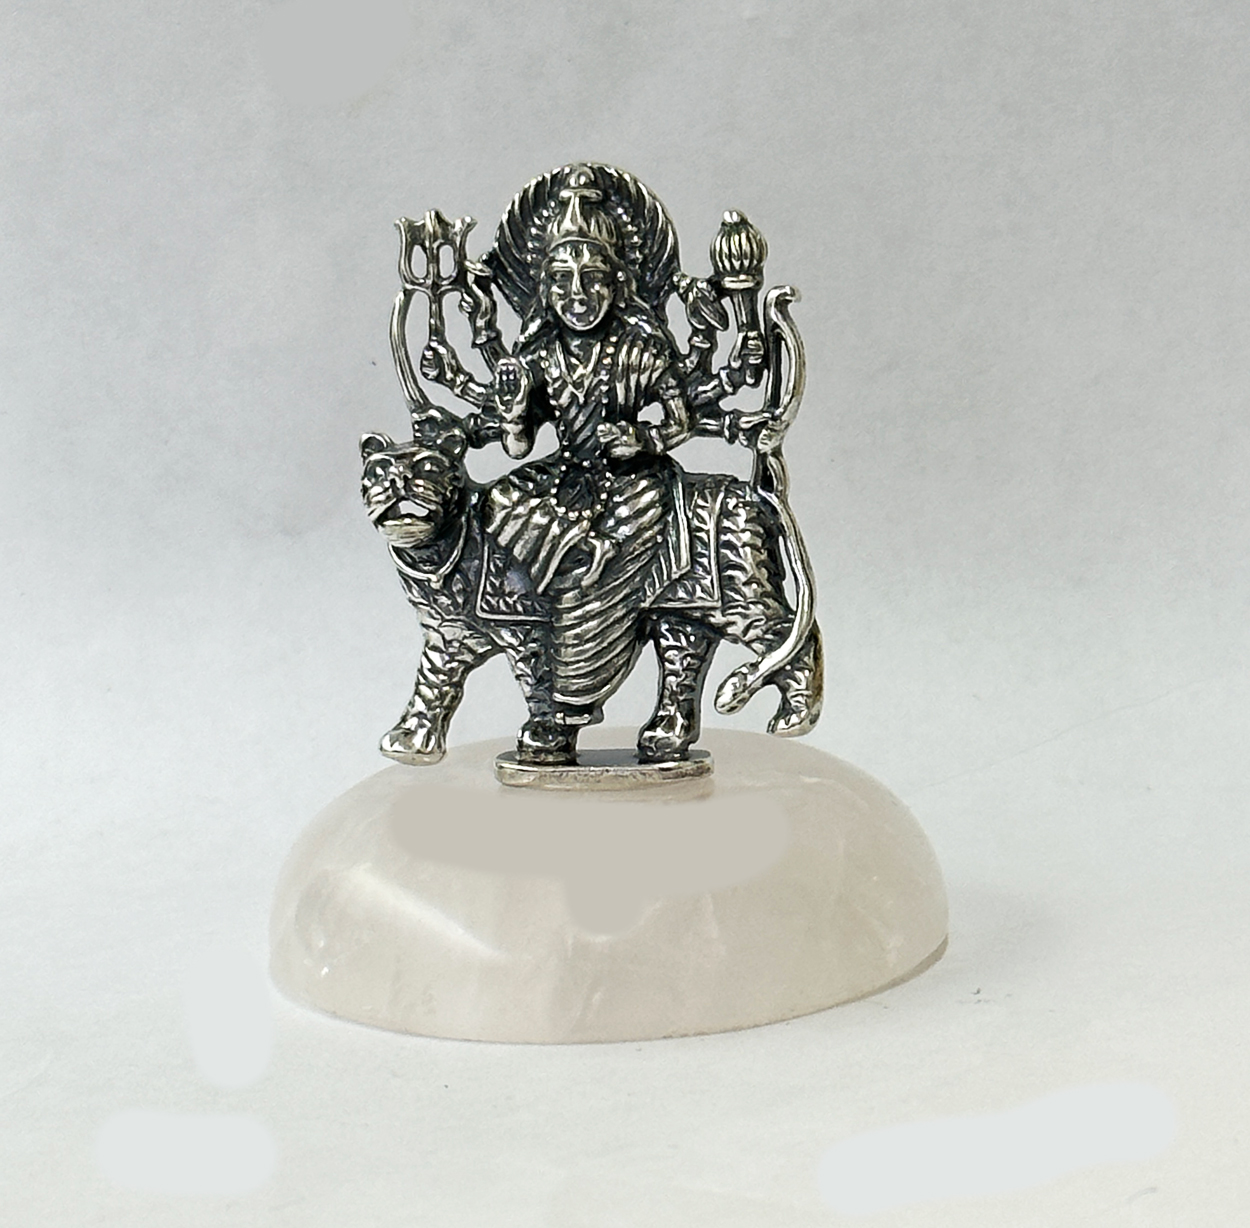 Durga Maa Murti, Shero vali maa statue for pooja room, décor your home,  office and gift your relatives, showpiece figureine, religious idols